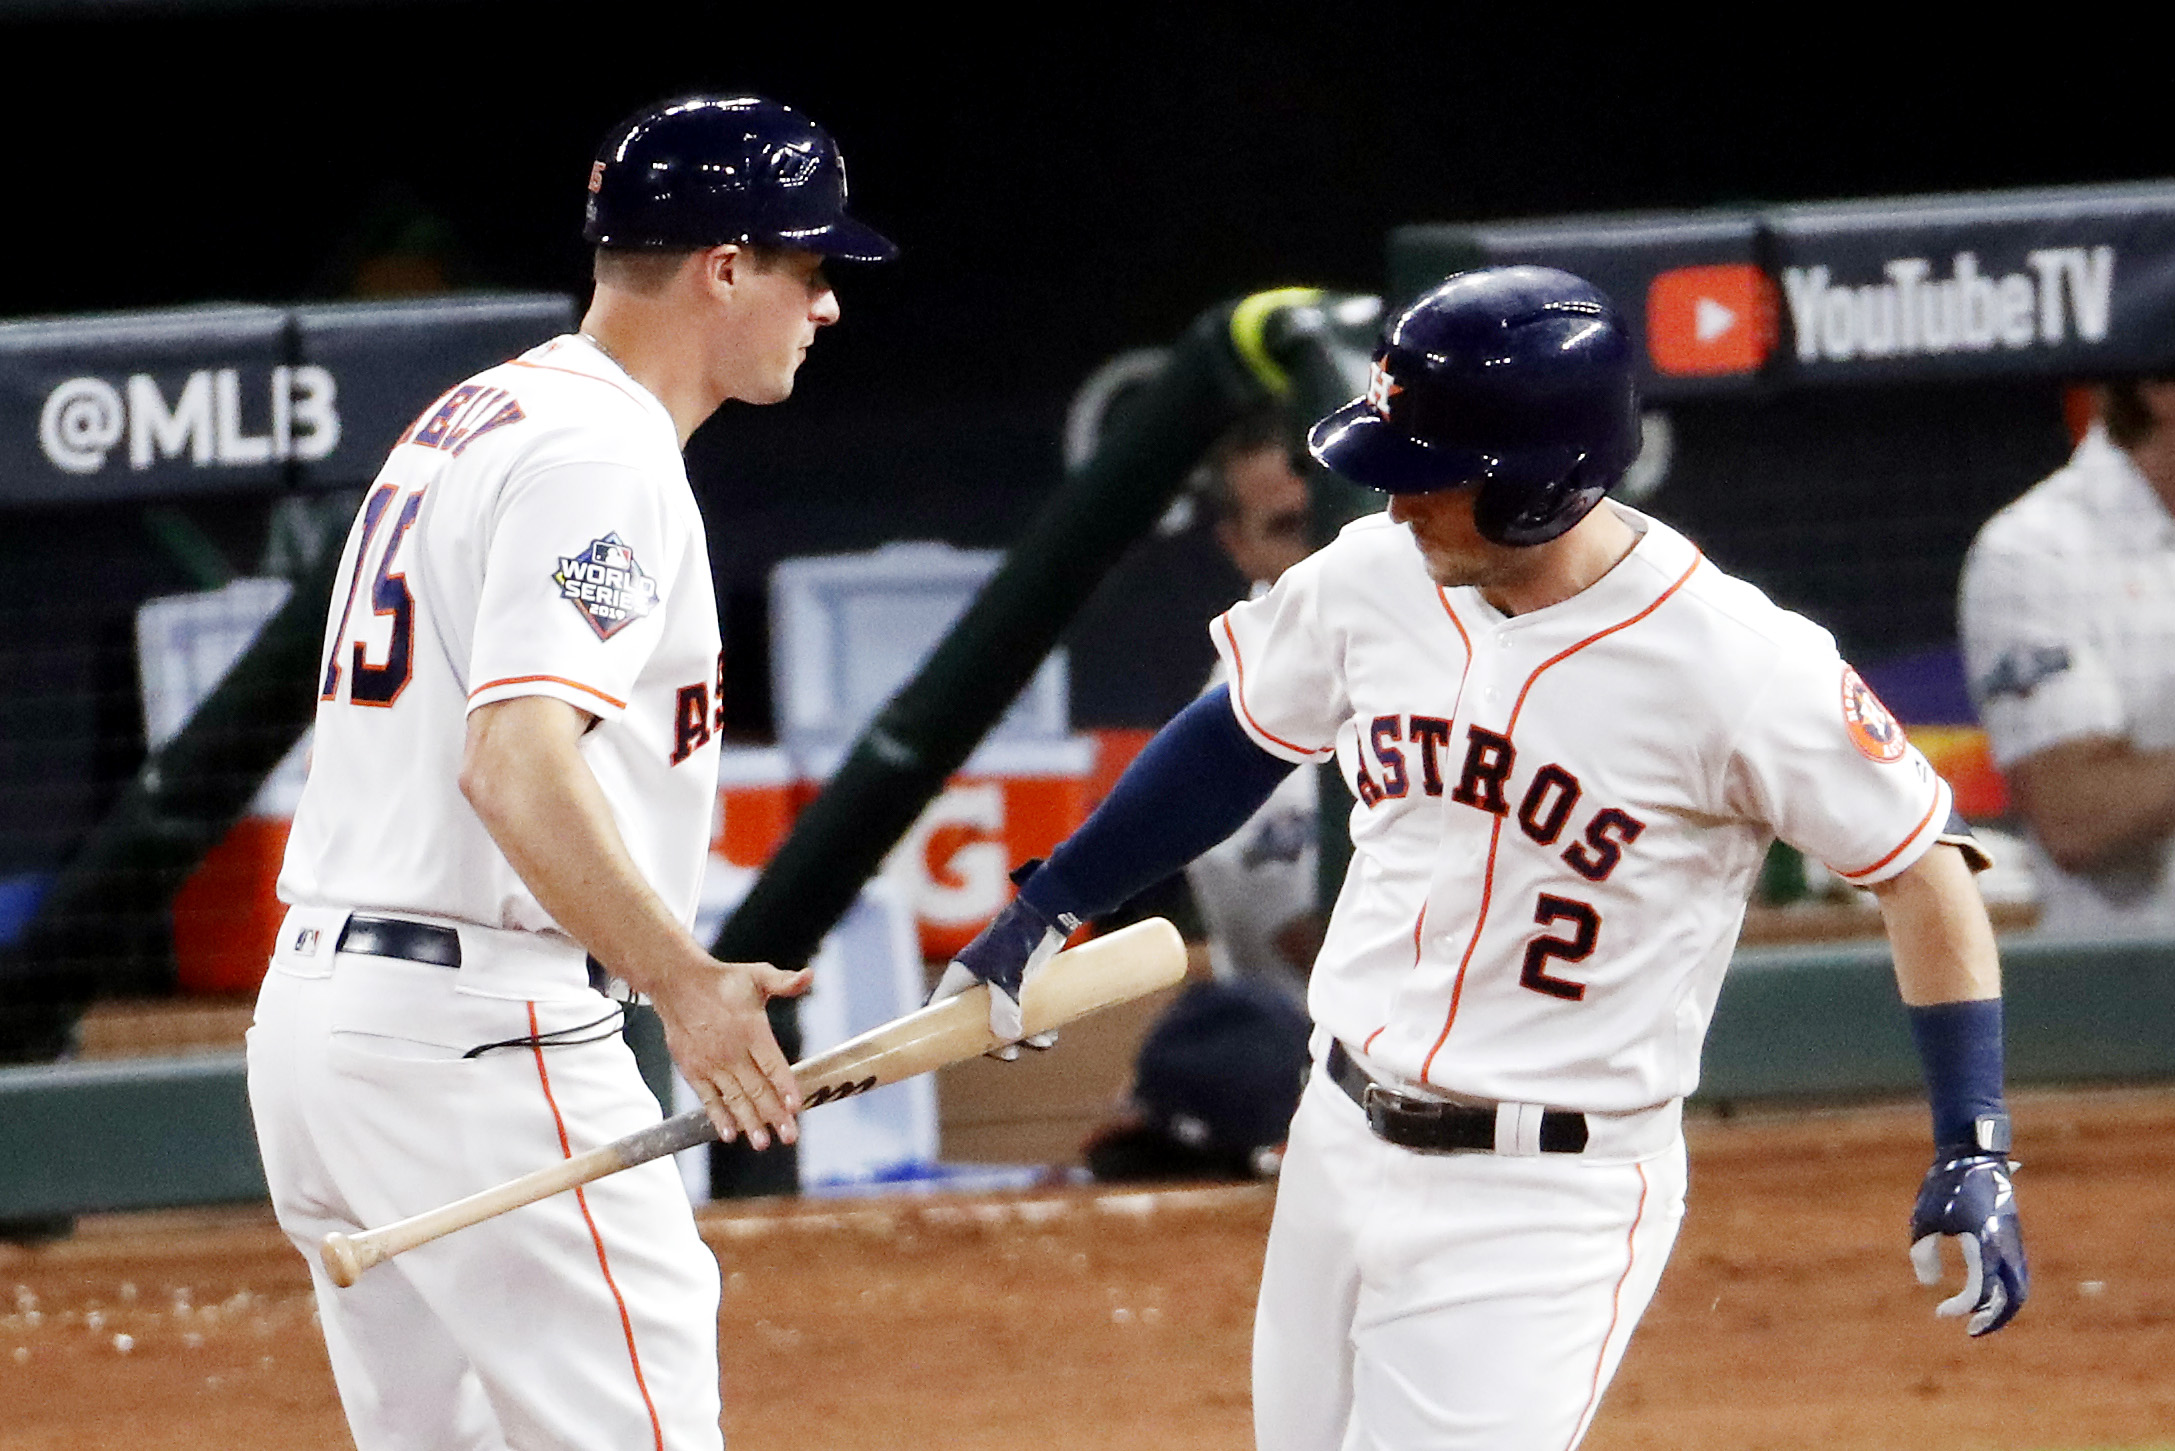 Alex Bregman goes all out to prank youth baseball players